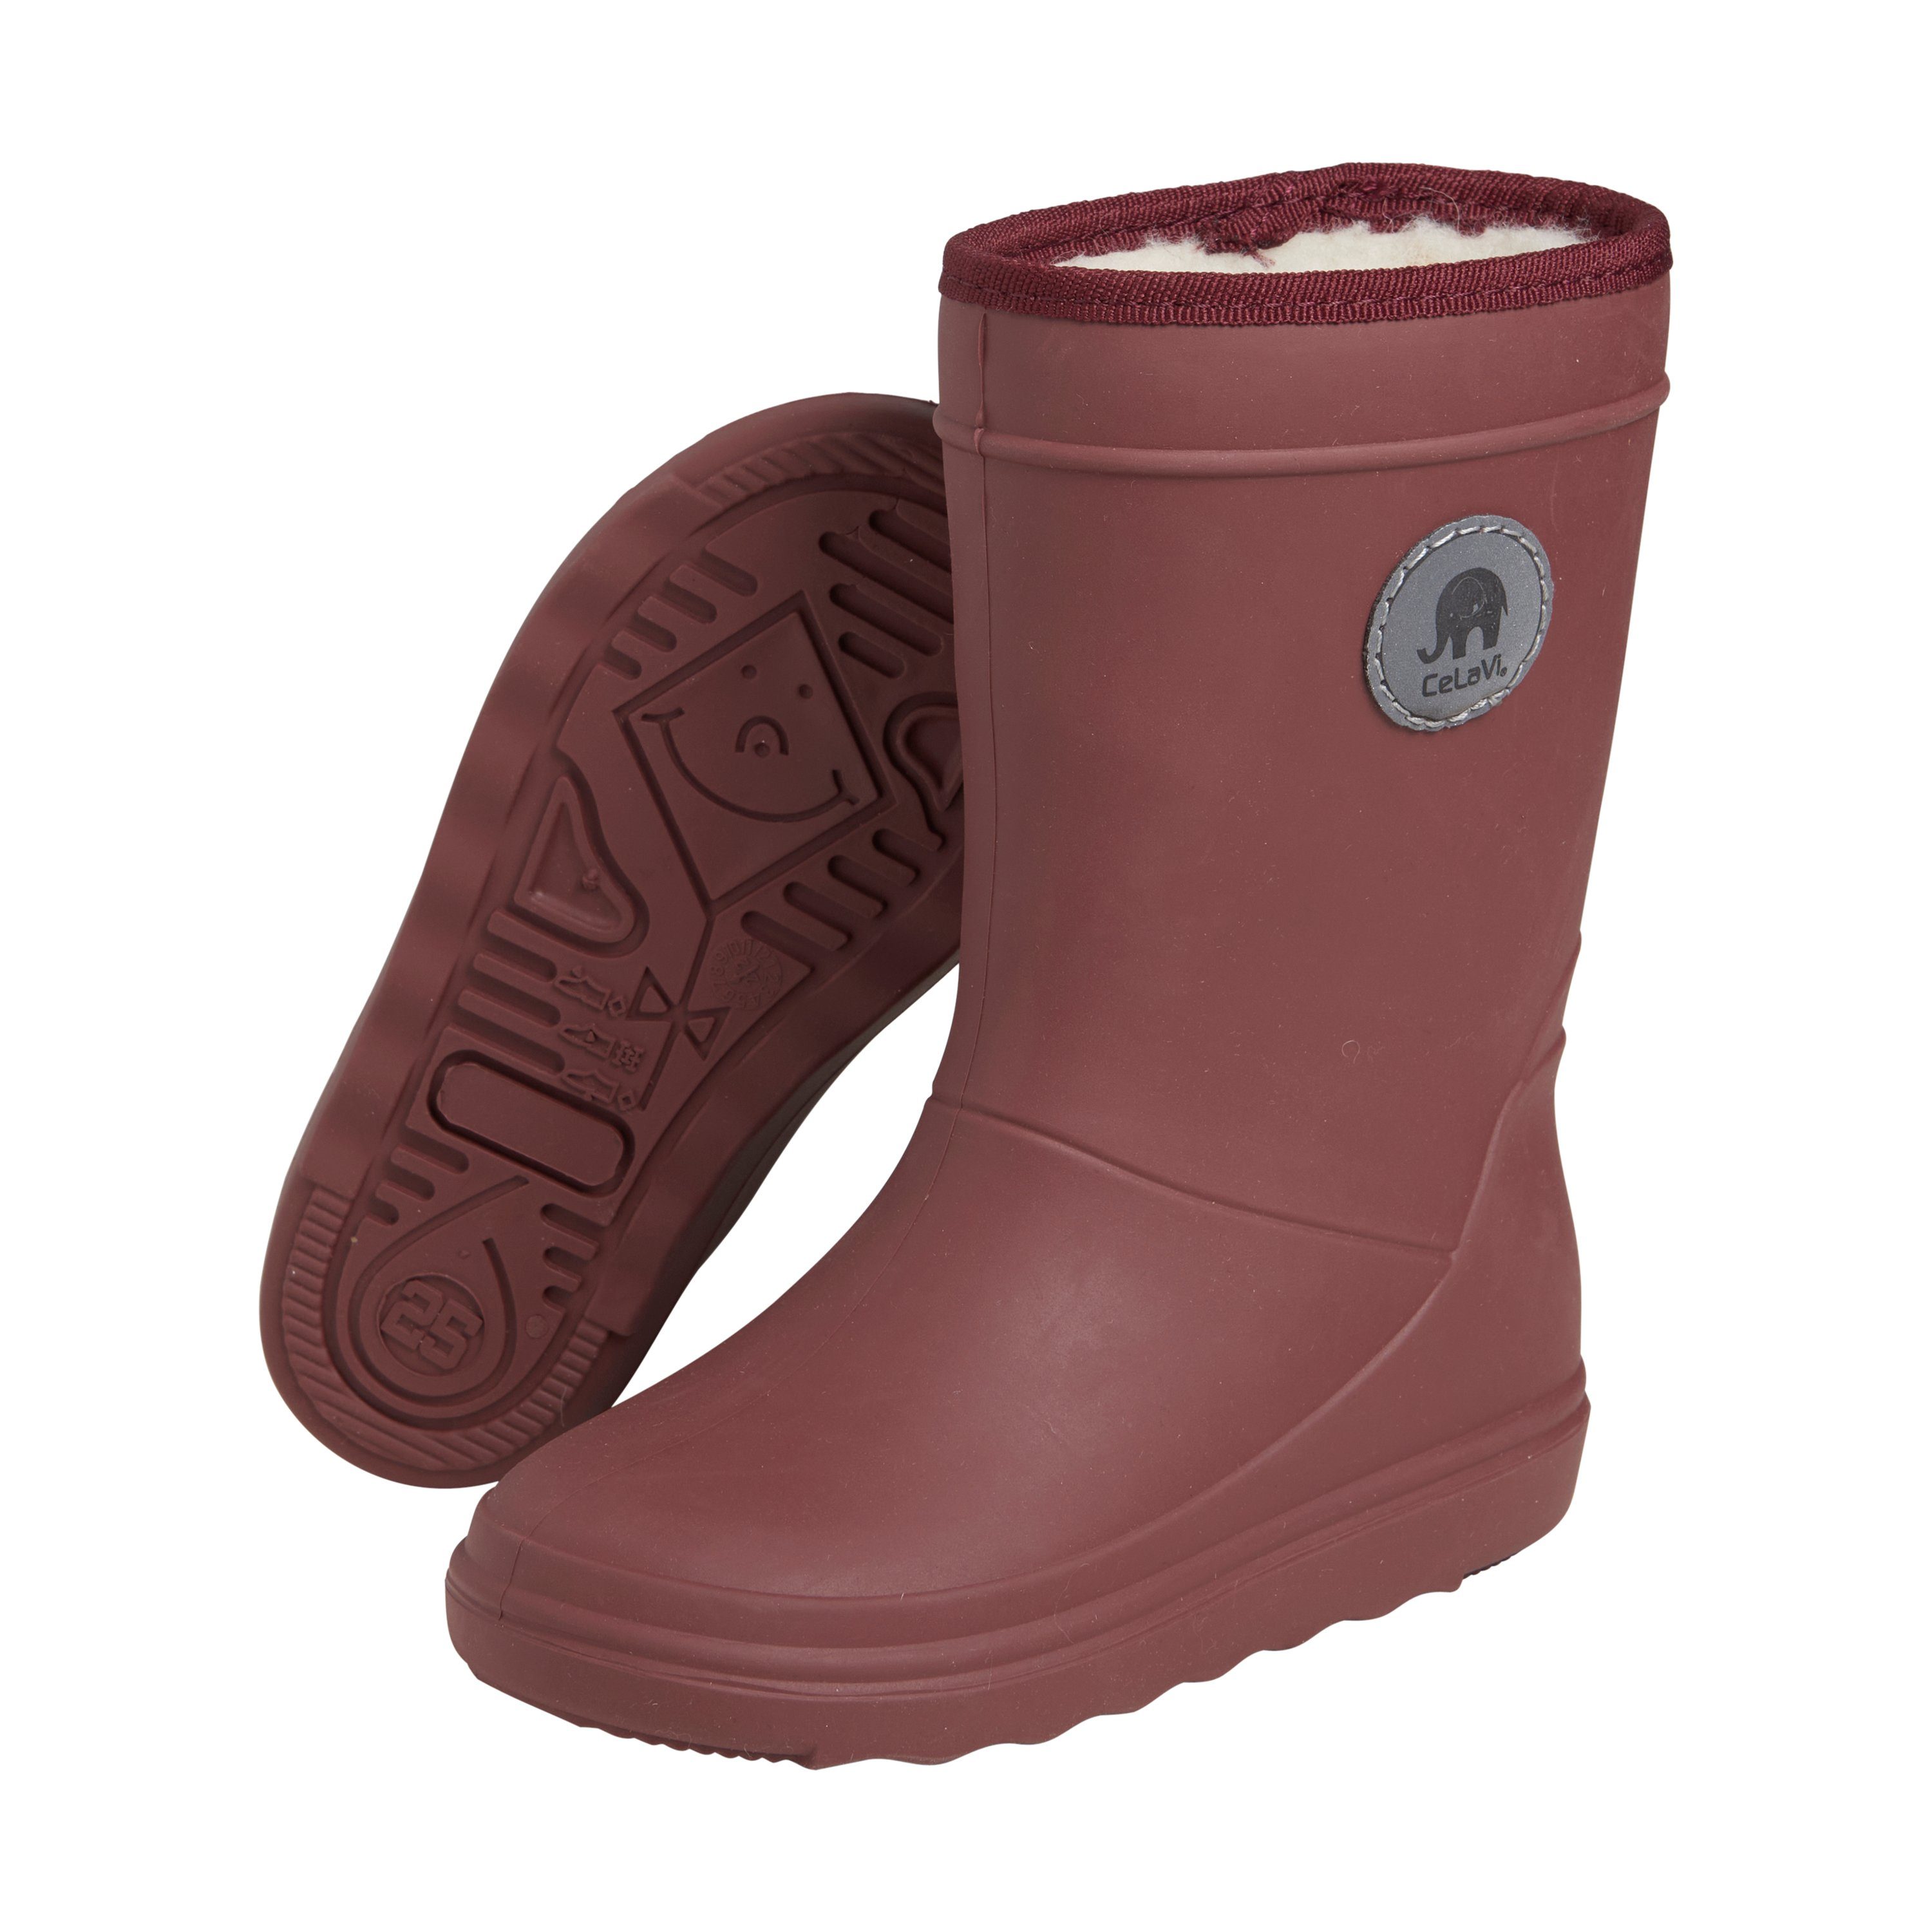 CeLaVi CEThermo Boots 6274 - Brown Rose (694) Winterboots